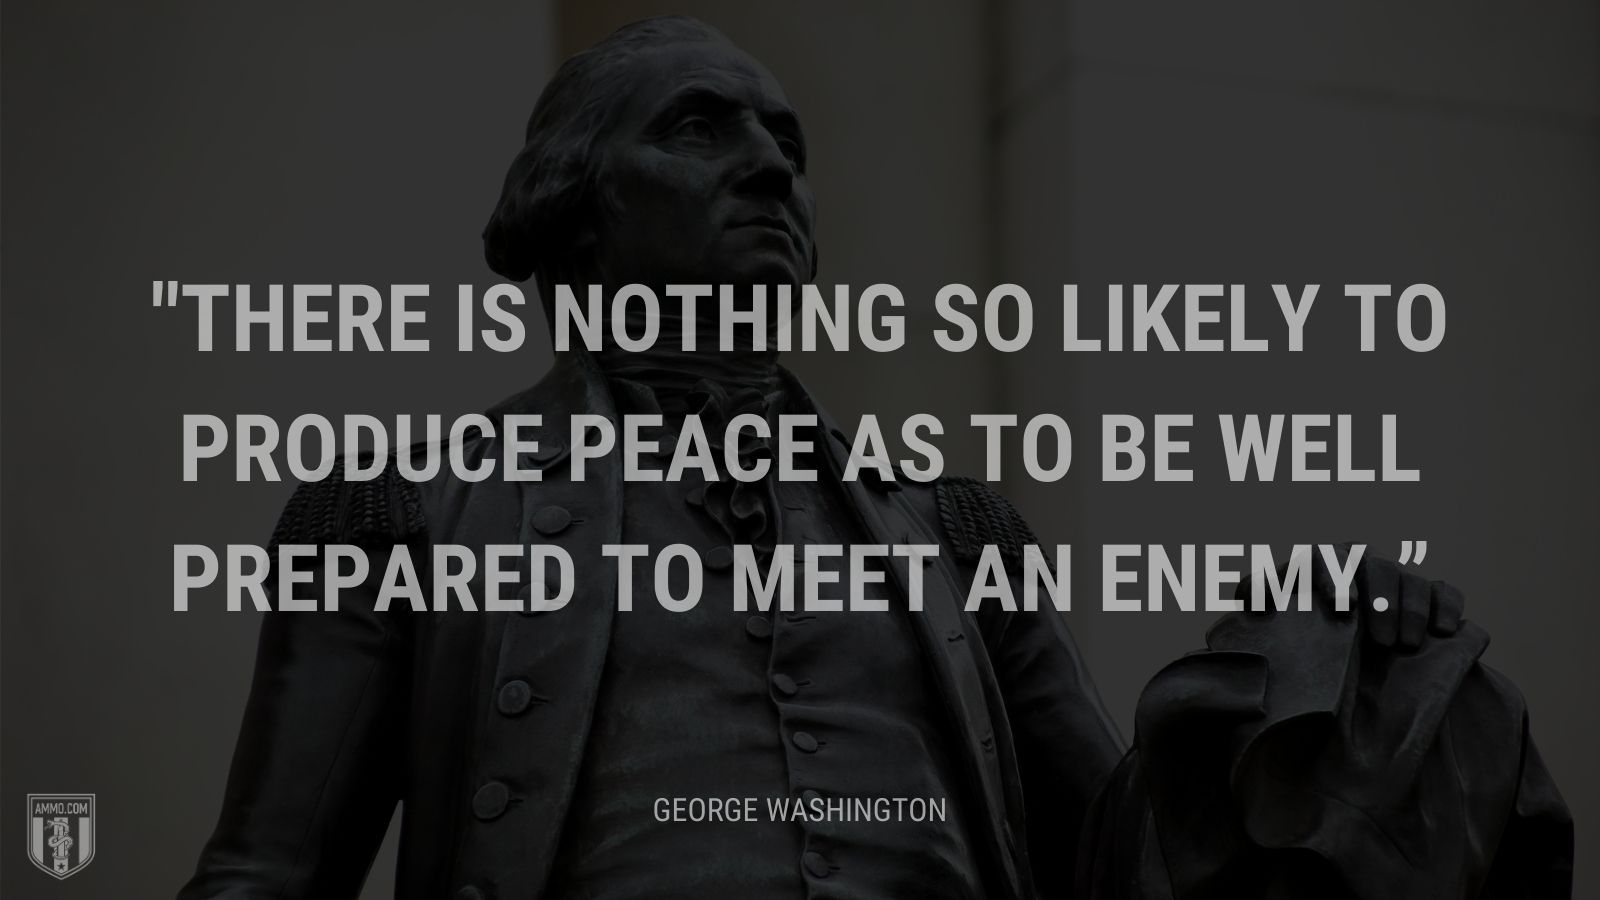 “There is nothing so likely to produce peace as to be well prepared to meet an enemy.” - Elbridge Gerry